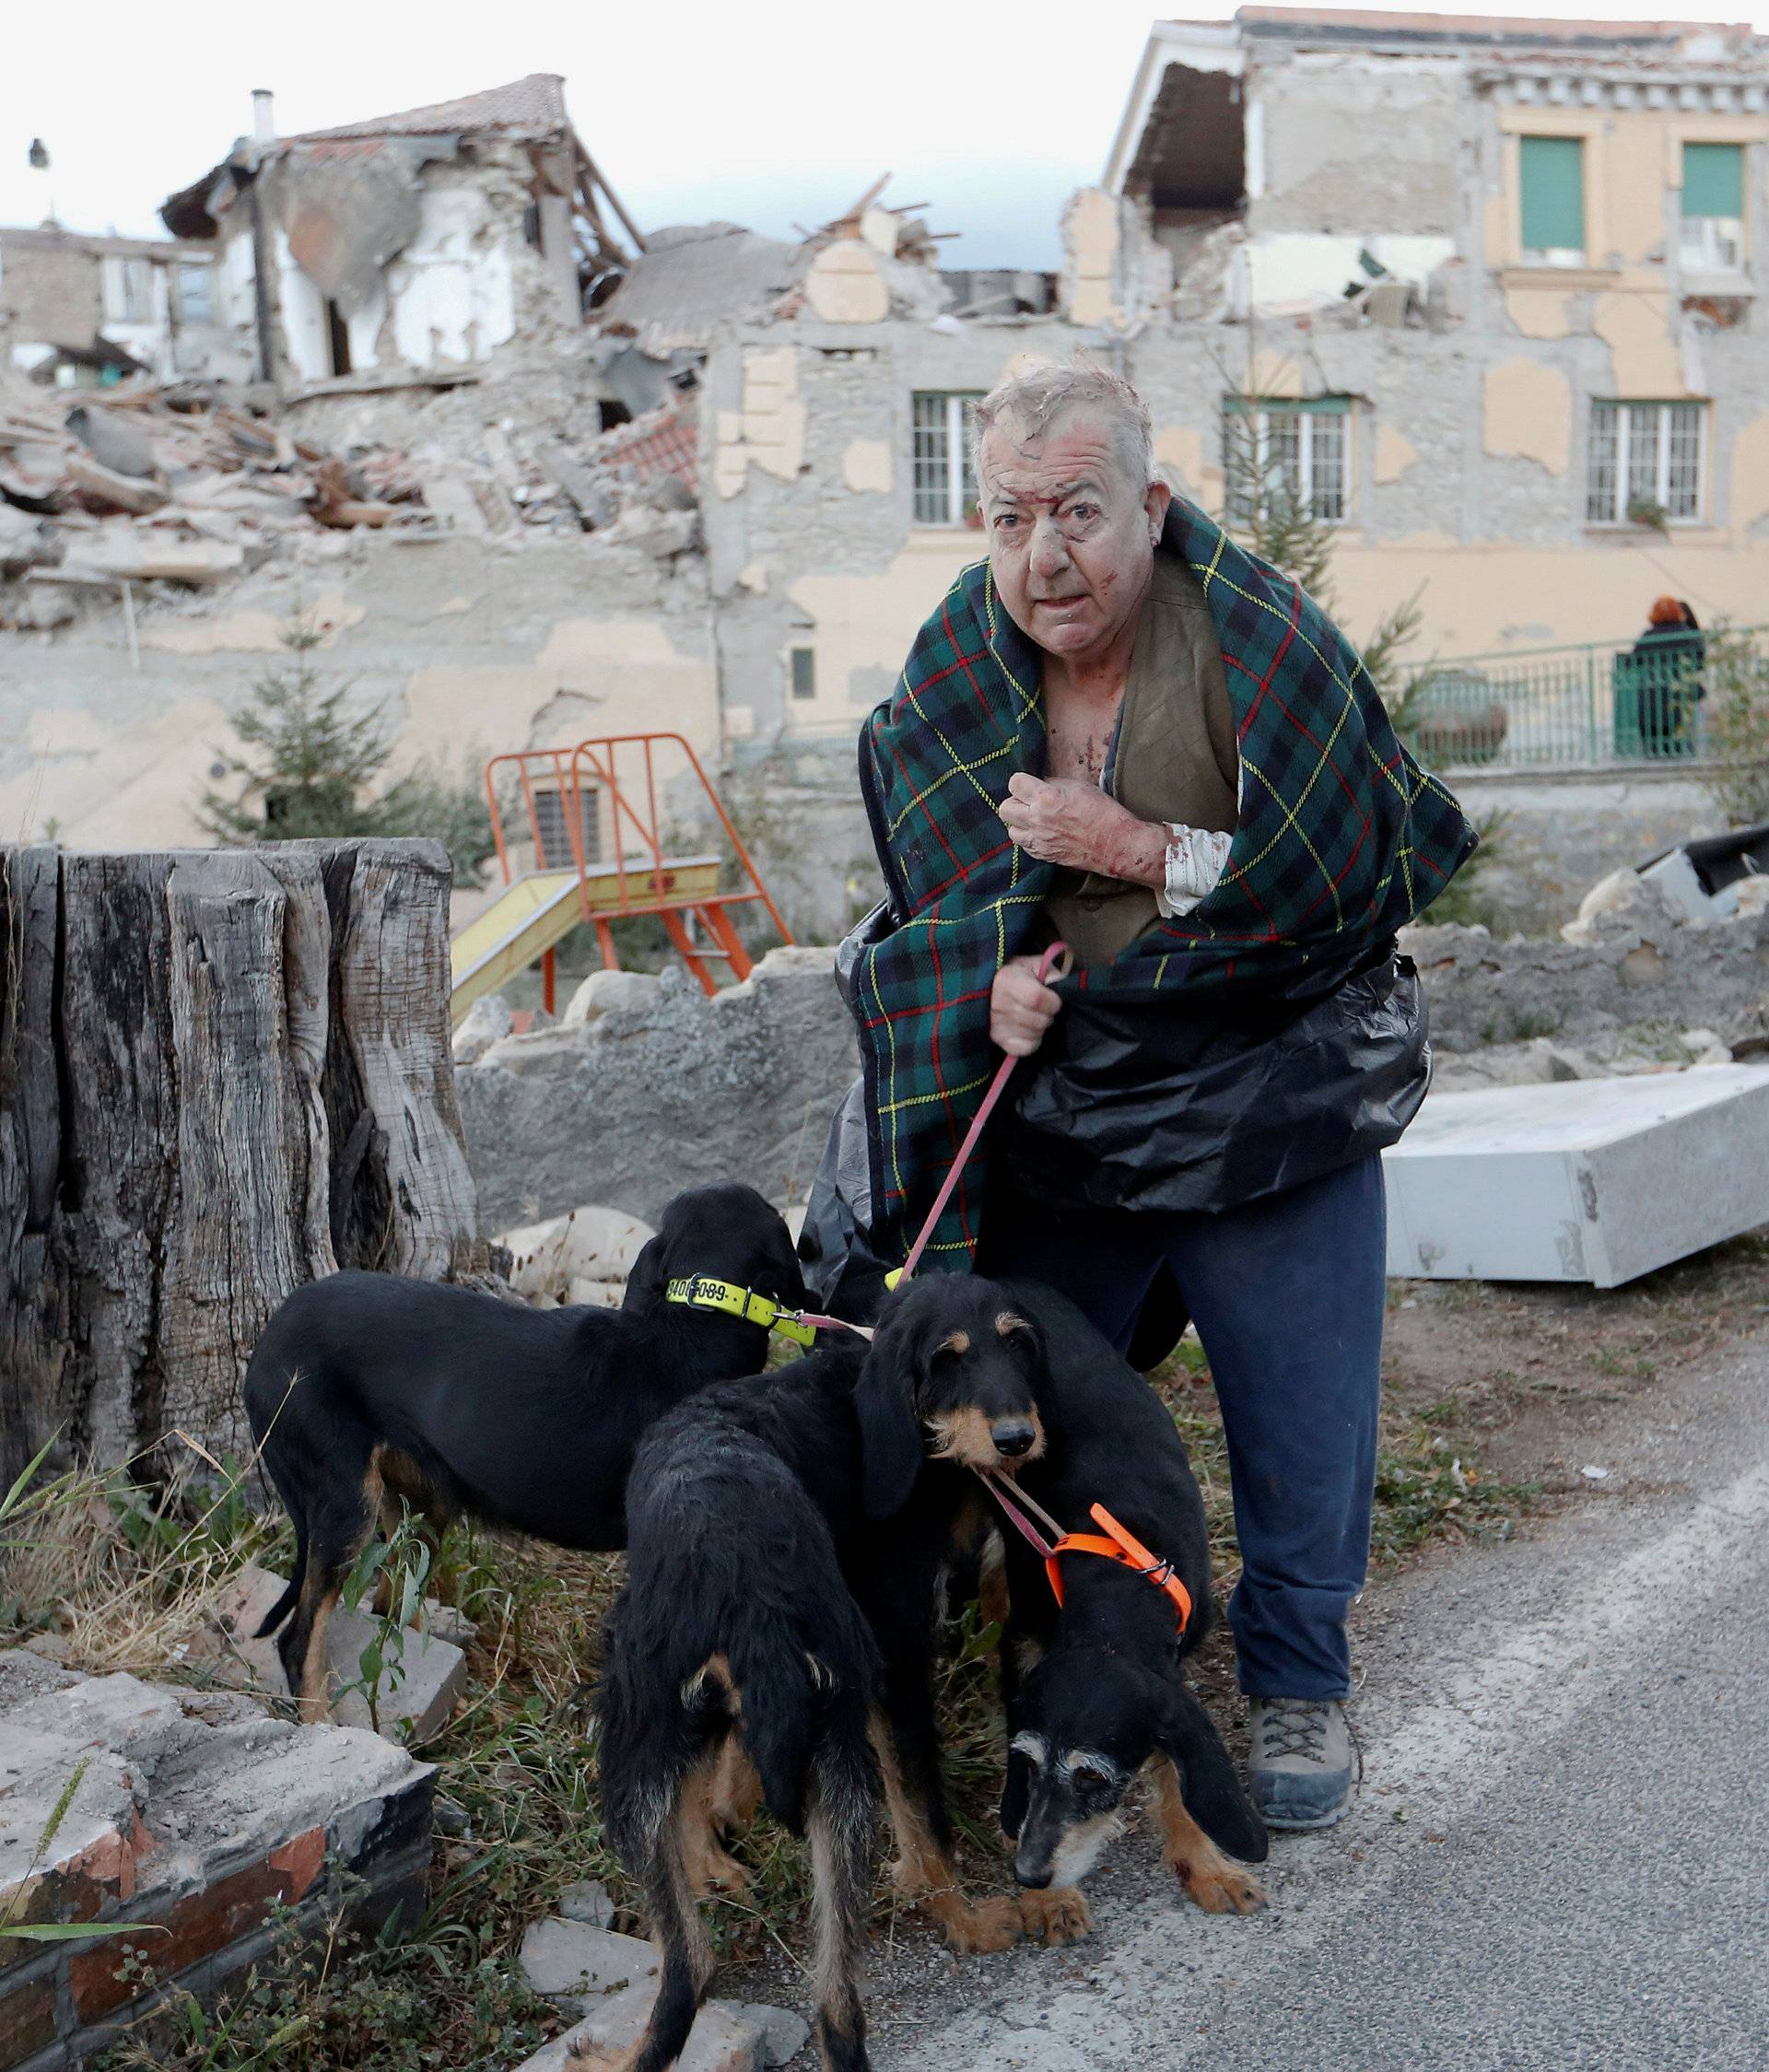 A man stands with dogs following an earthquake in Amatrice